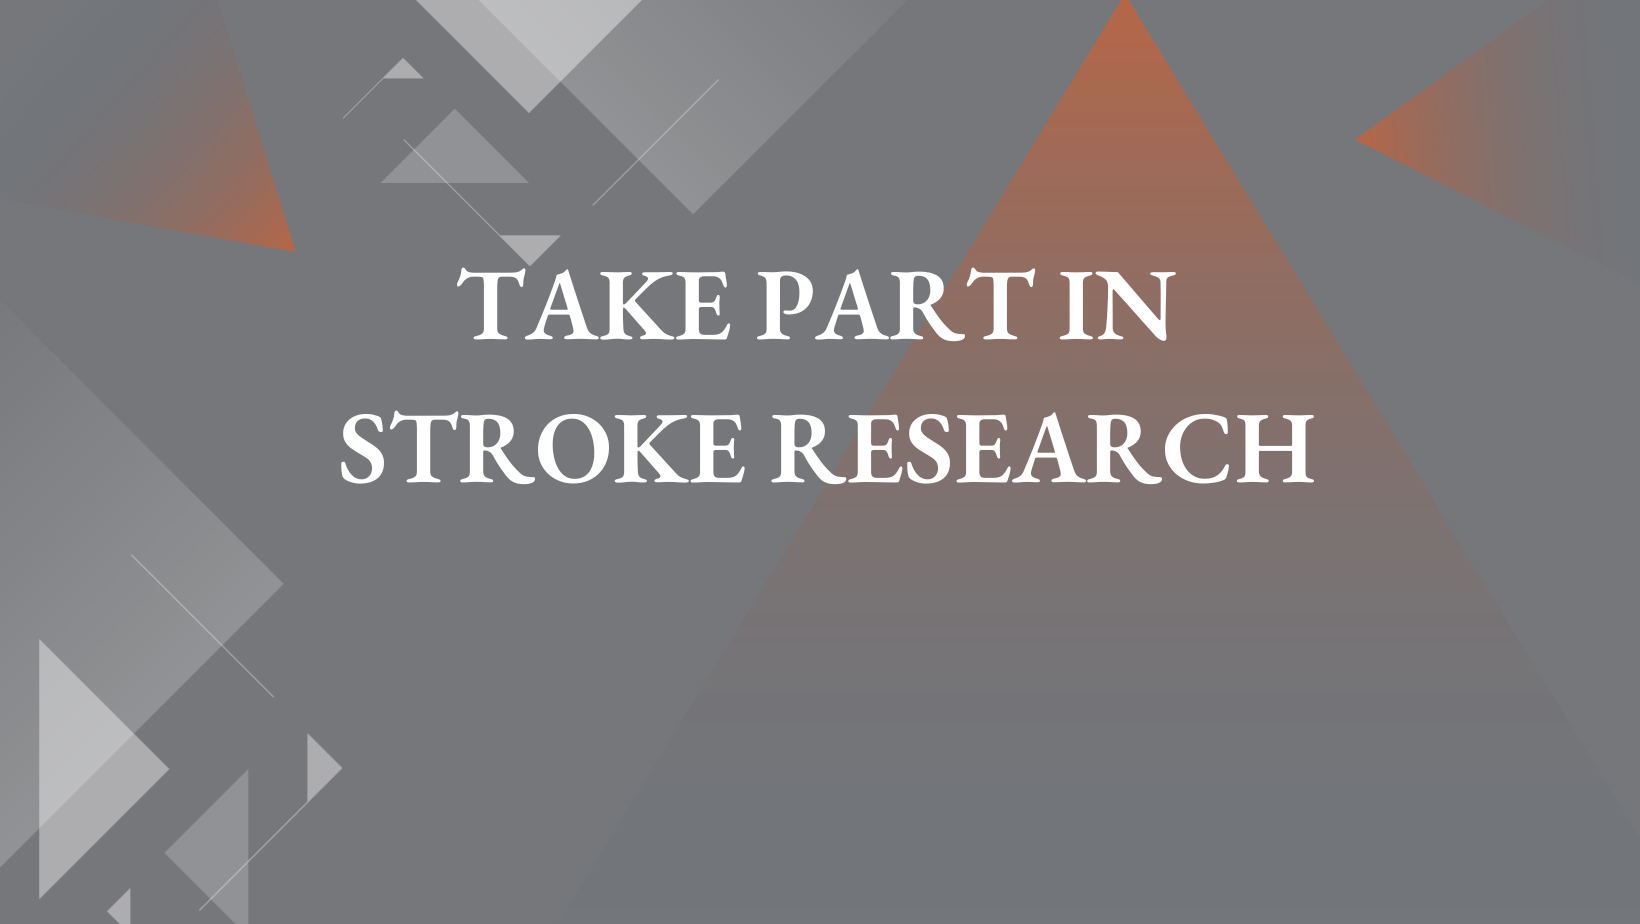 Let us know if wish to learn more about Stroke Institute research studies